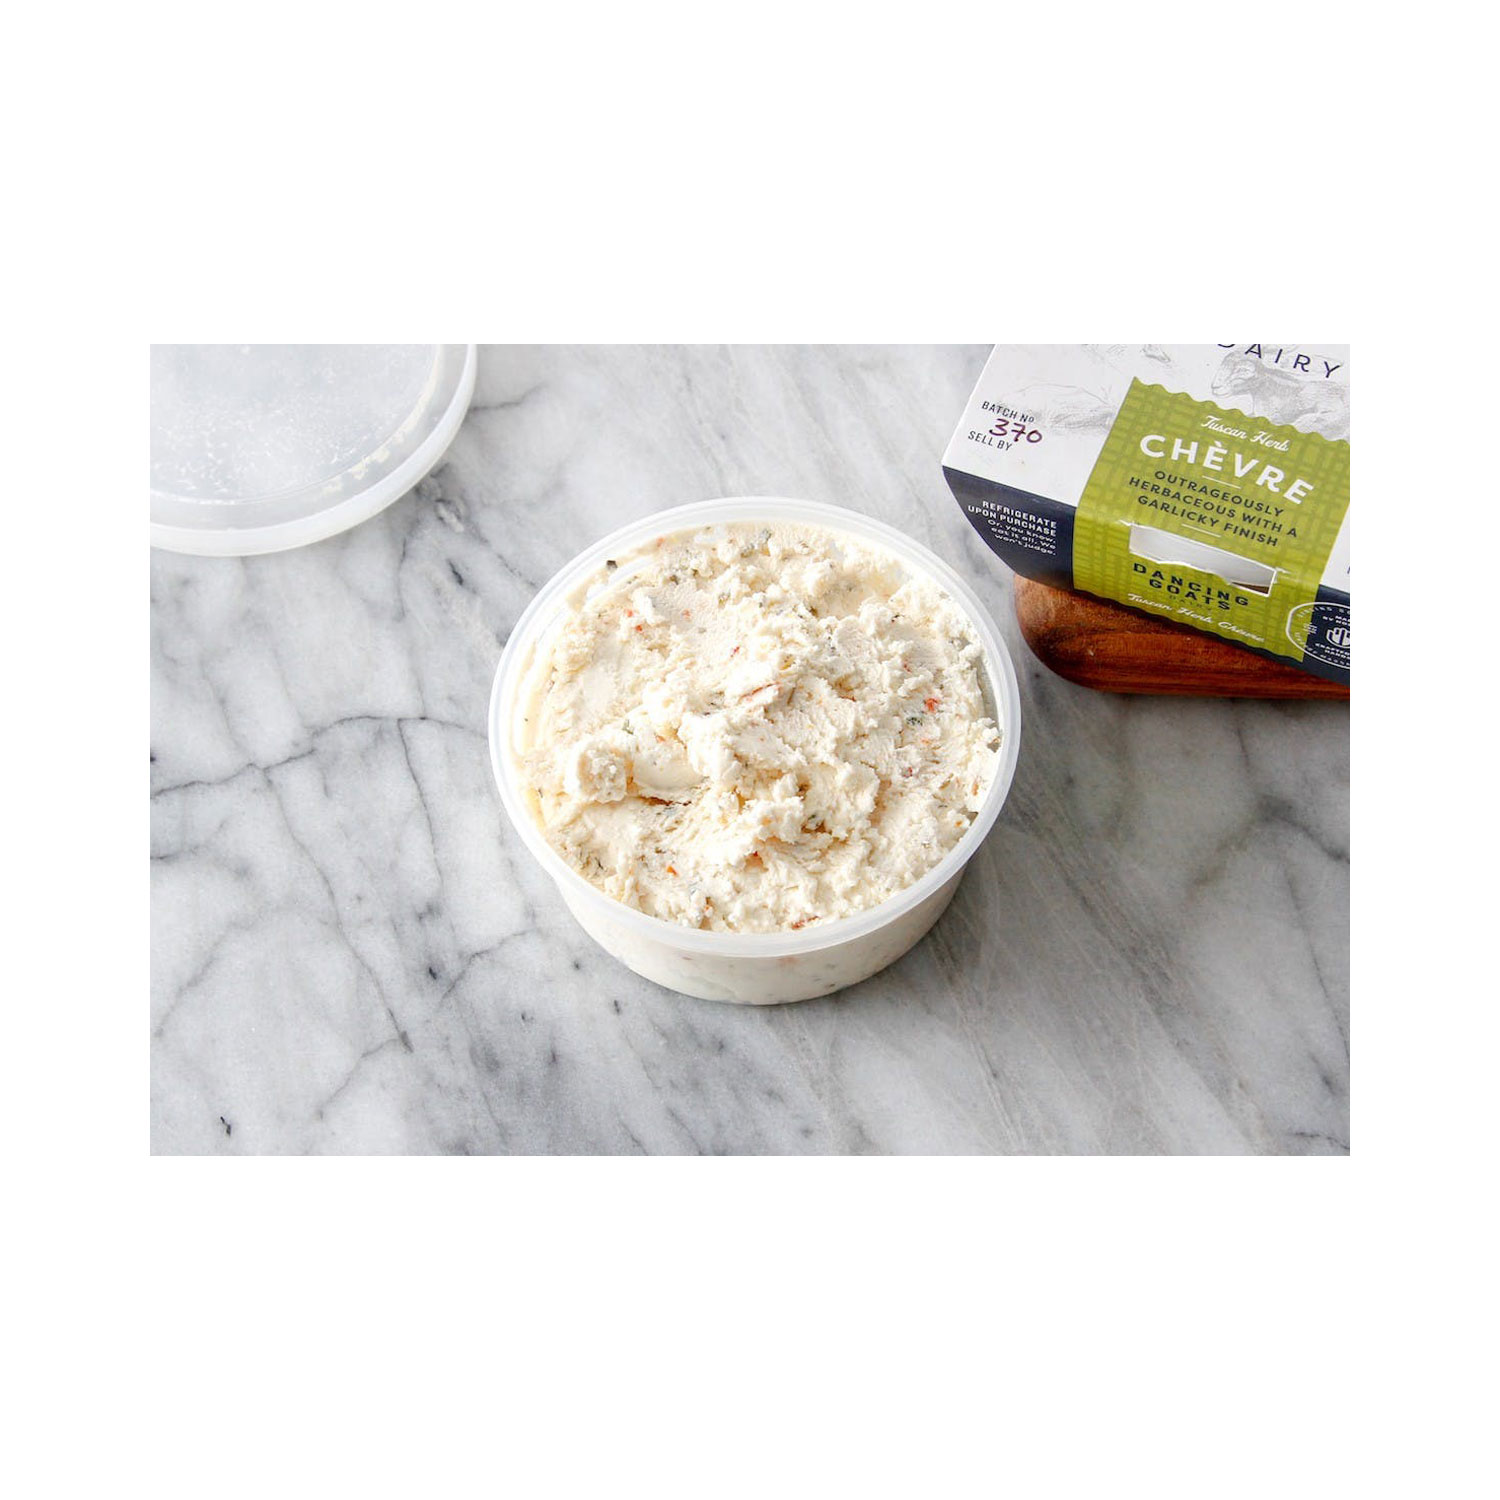 WHIPPED CHEVRE BY DANCING GOATS DAIRY